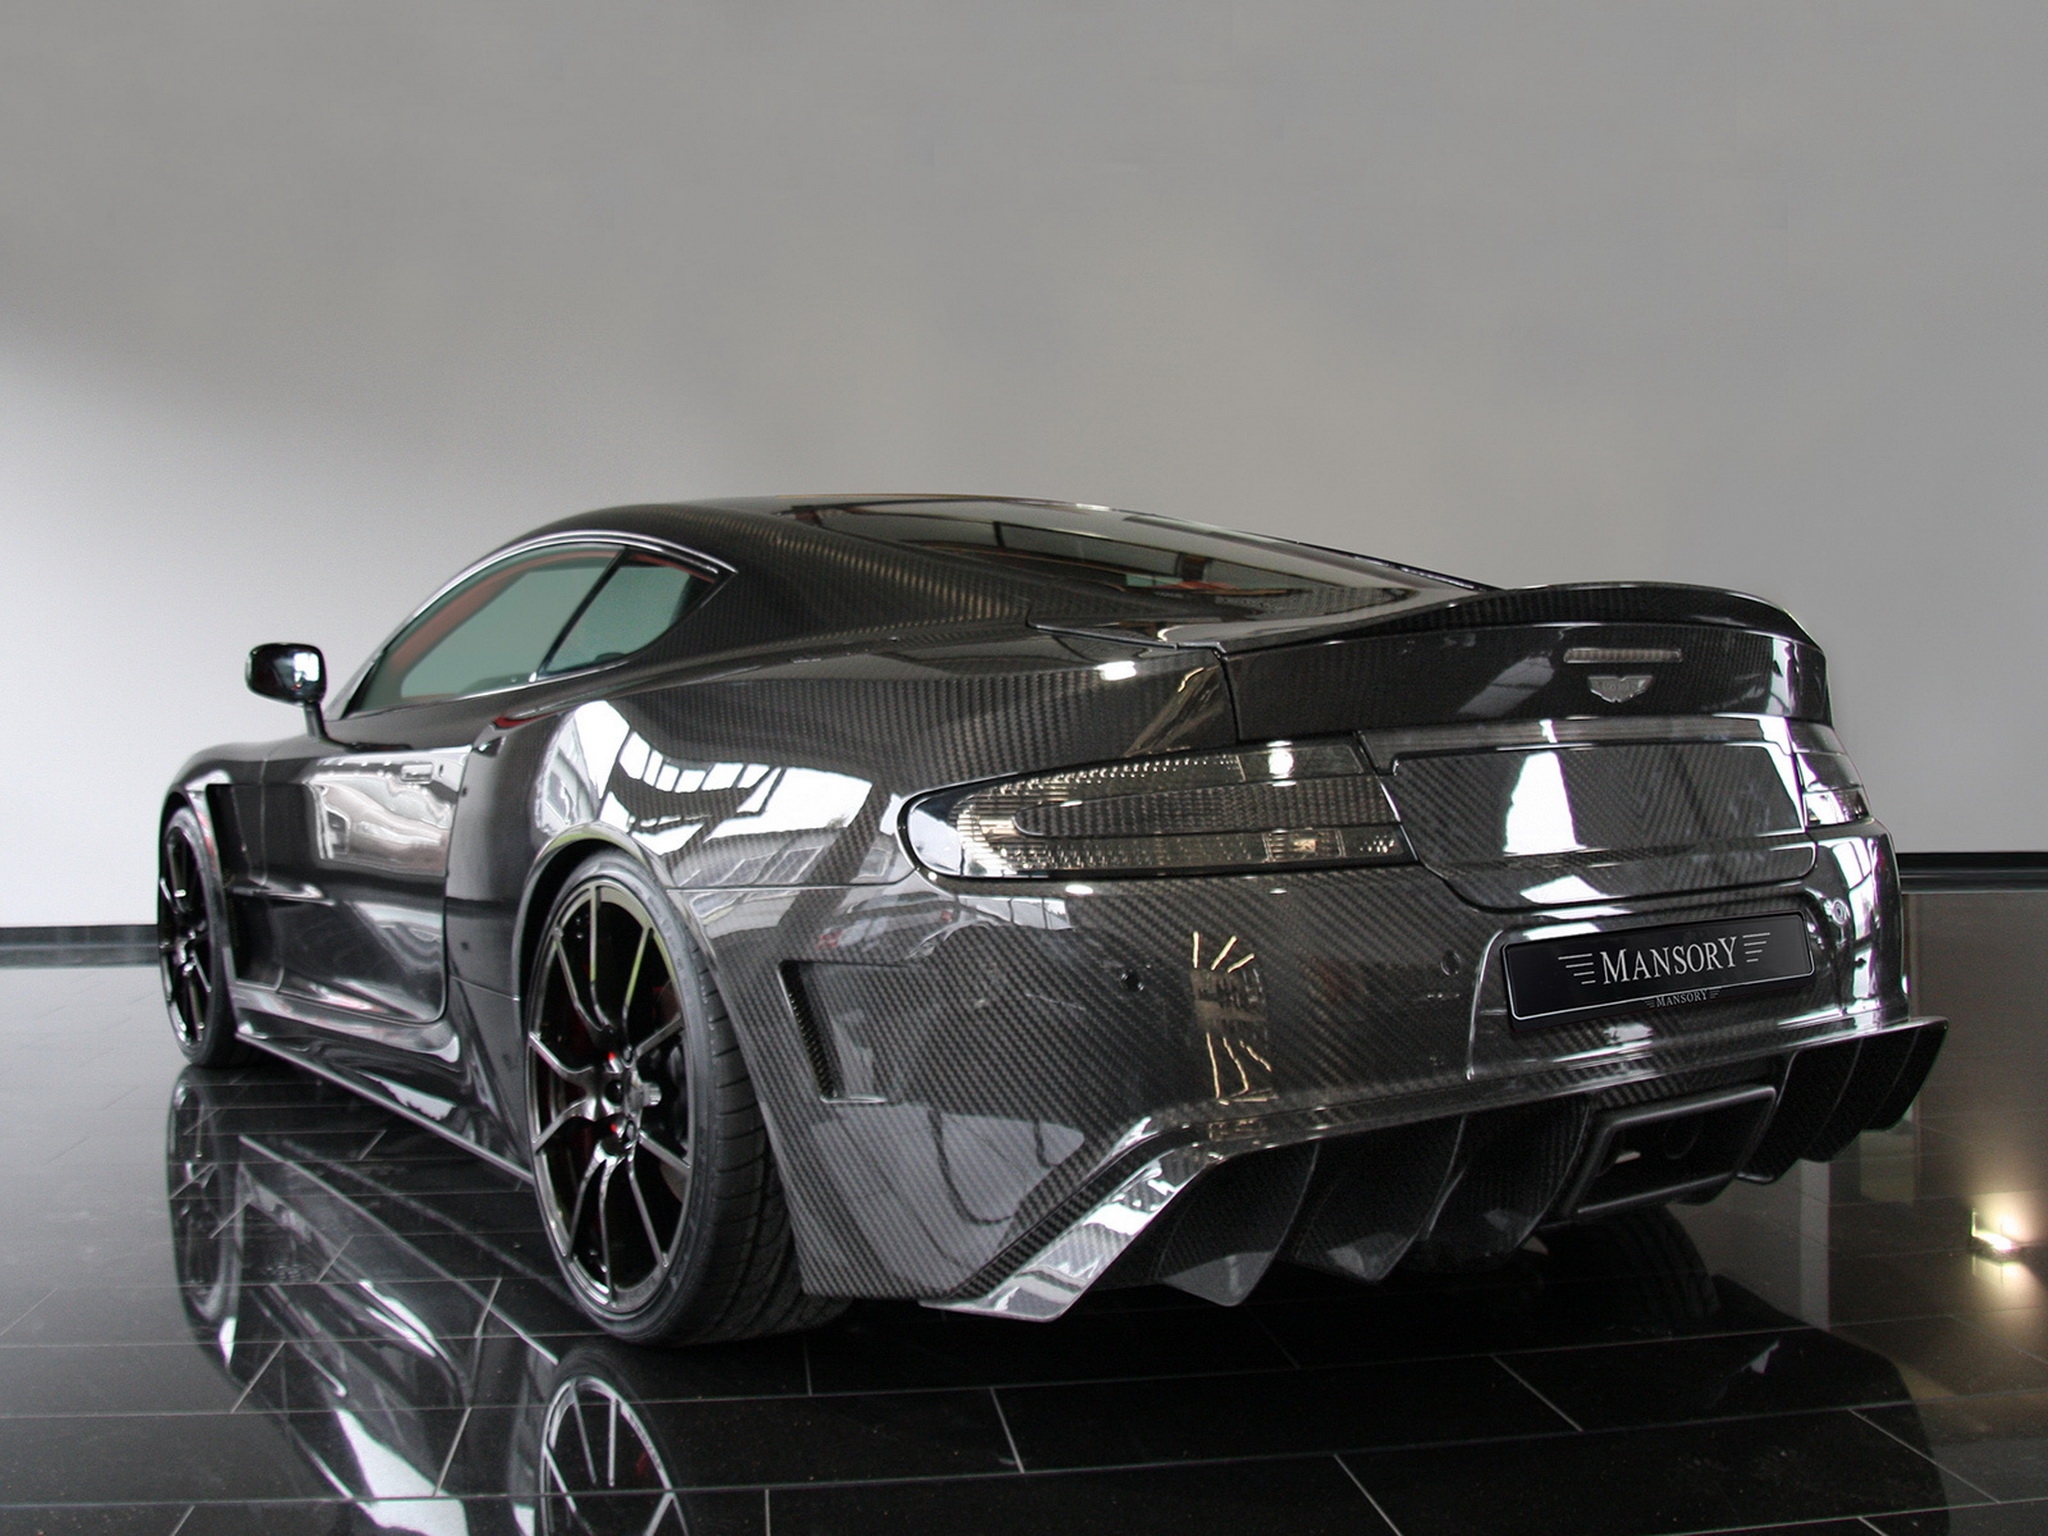 black, cars, aston martin, carbon, reflection, back view, rear view, style, dbs, 2009, mansory